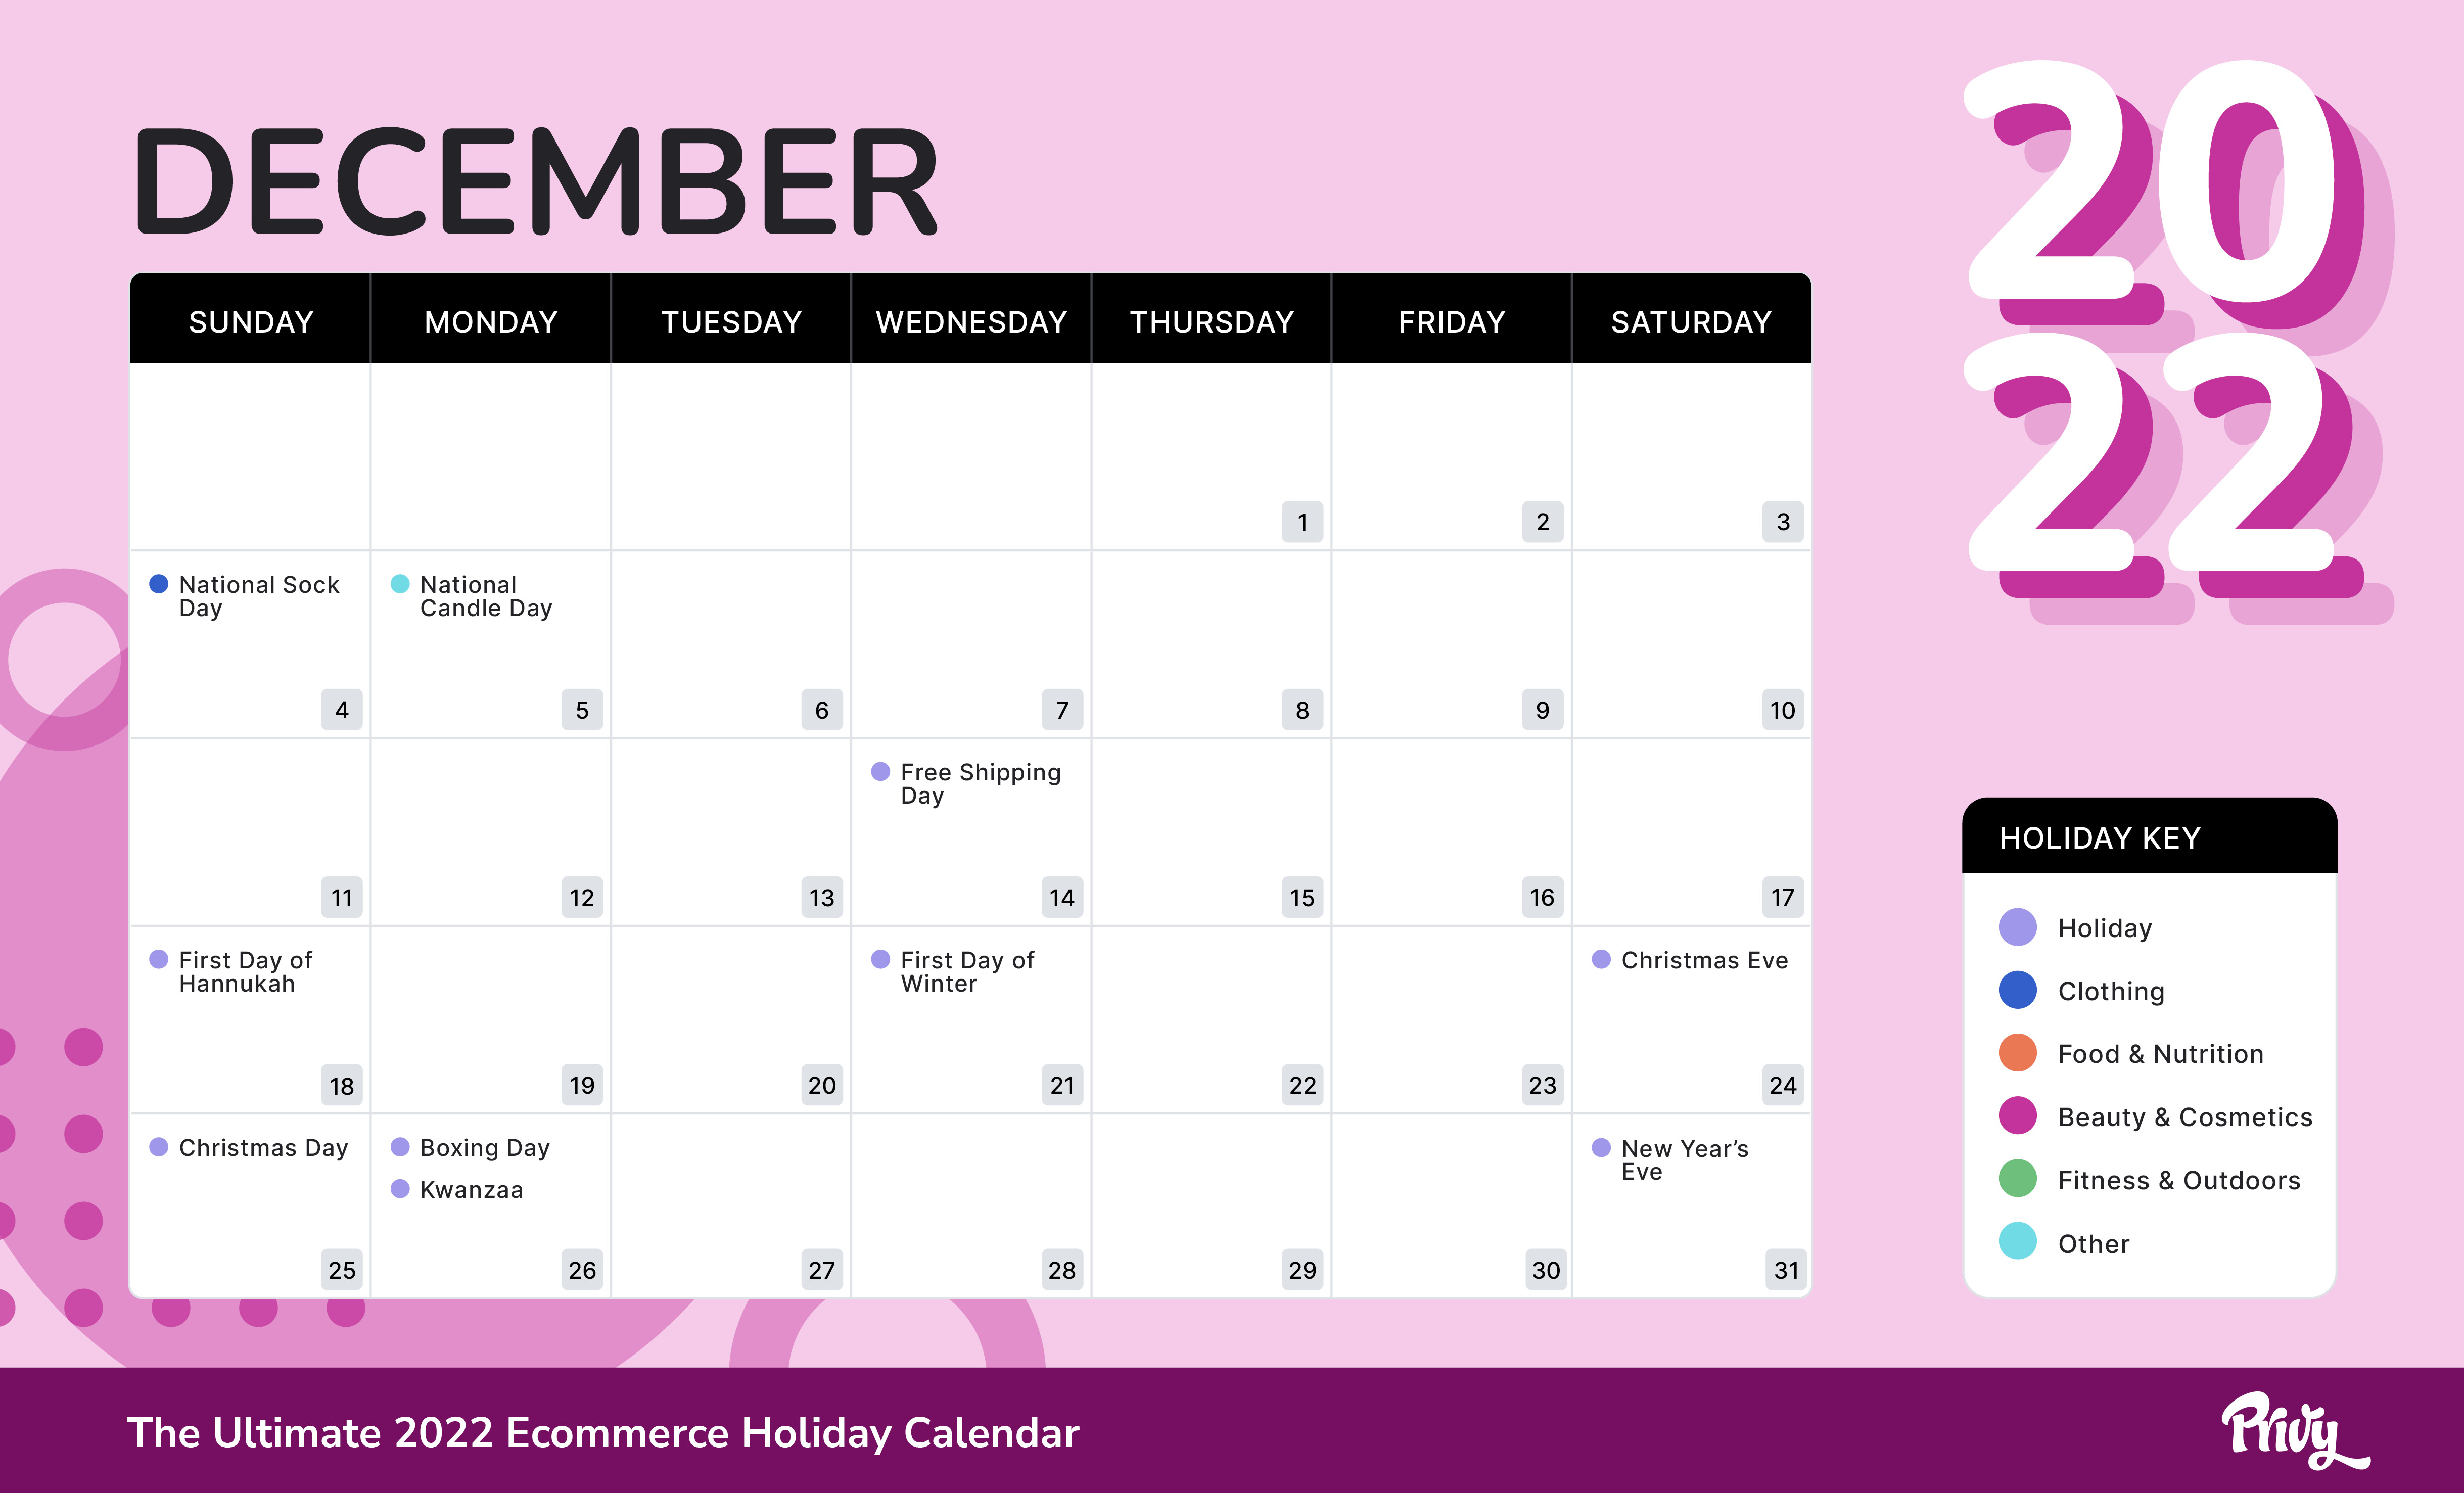 The Ultimate 2022 Holiday Calendar